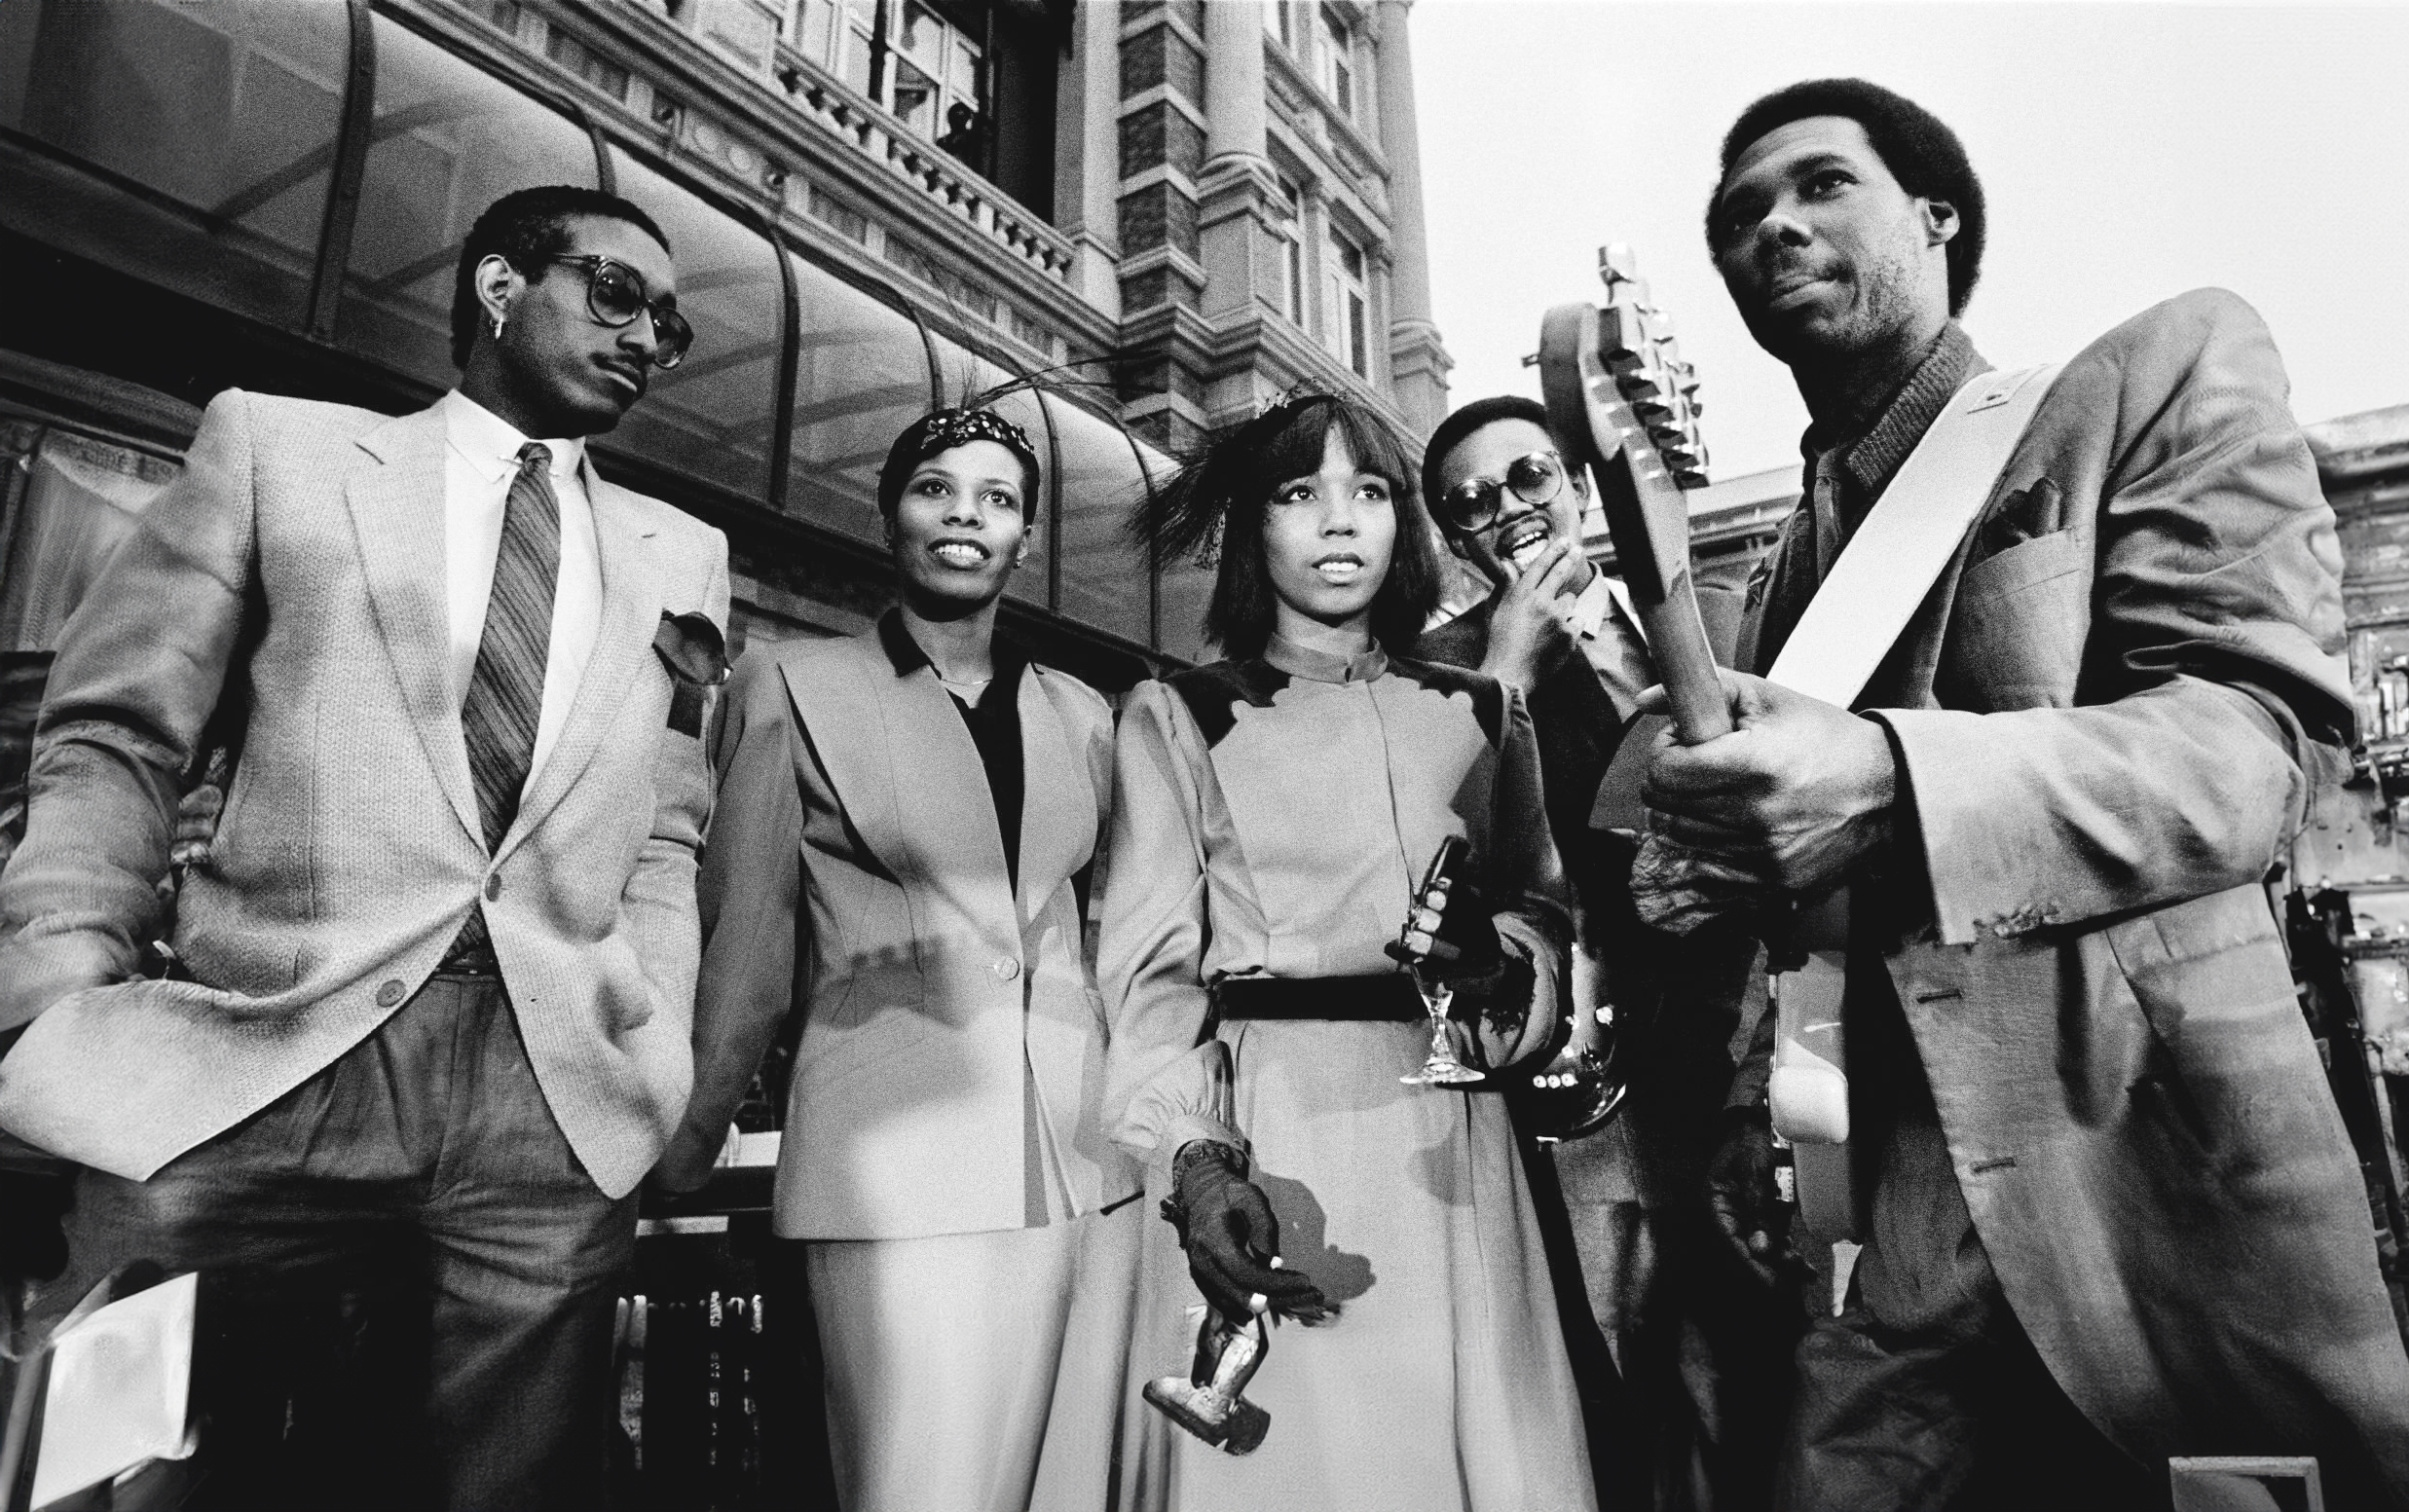 Musicians (L-R) Tony Thompson, Alfa Anderson, Luci Martin, Bernard Edwards and Nile Rodgers from Chic poses for a portrait in The Hague, in 1979.